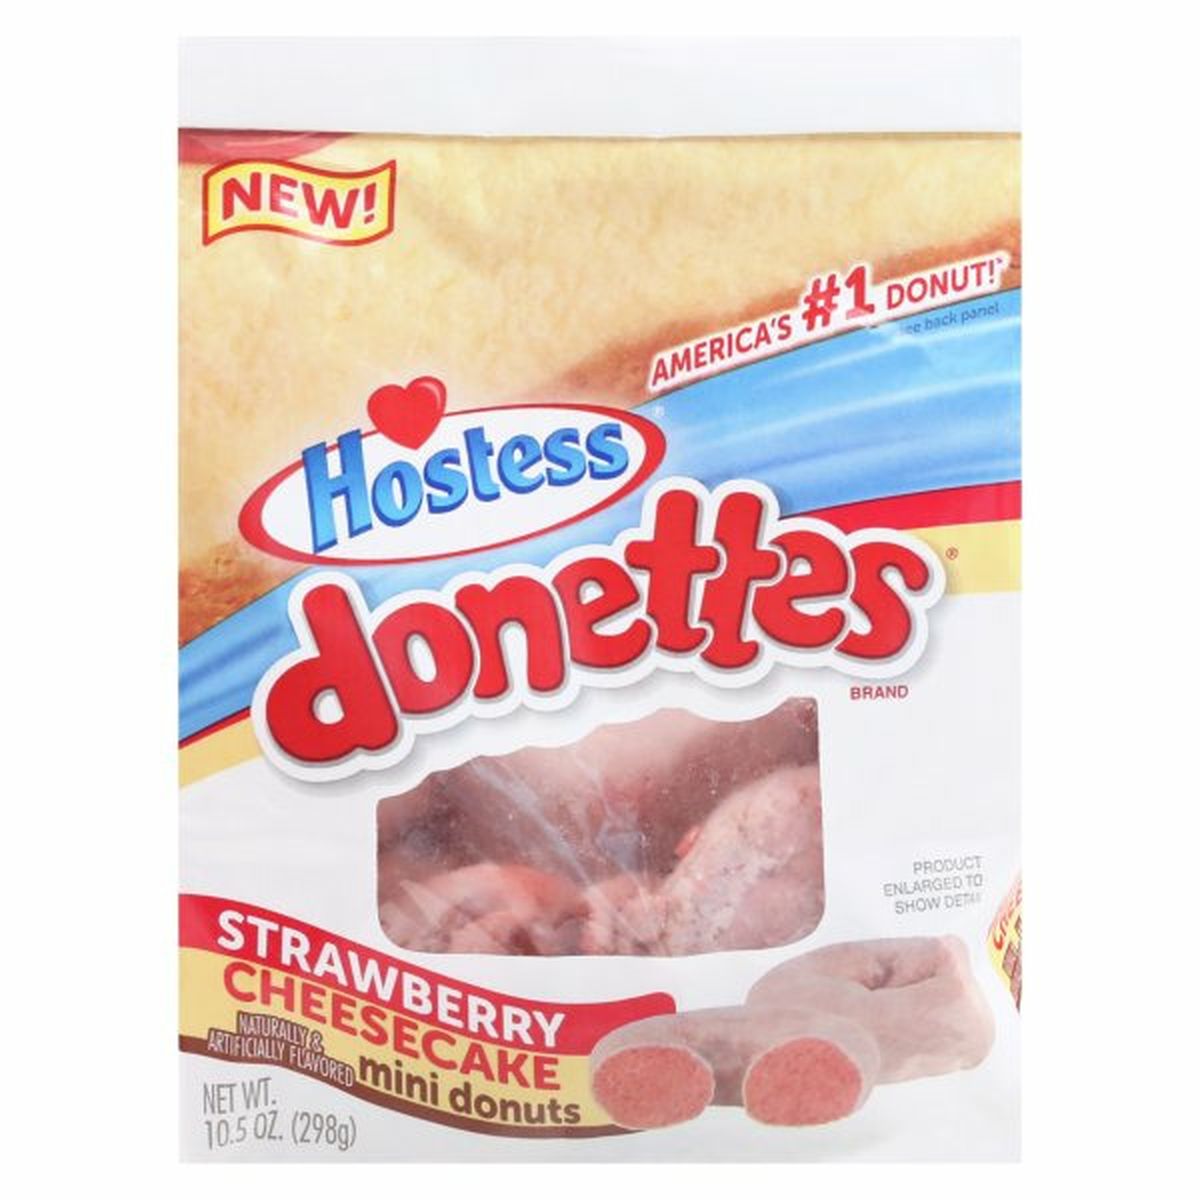 Calories in Hostess Donettes Donuts, Strawberry Cheesecake, Mini